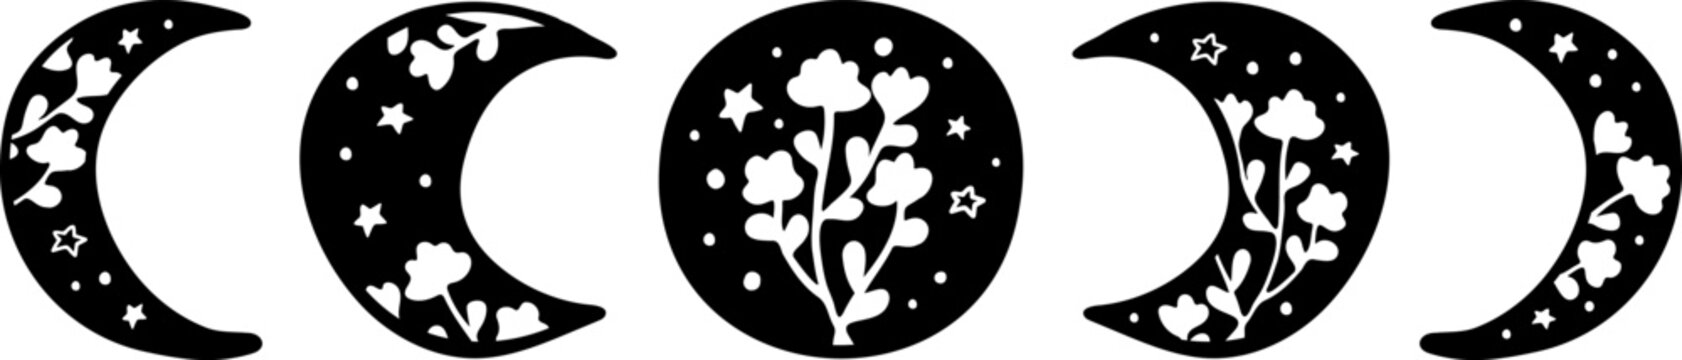 Floral moon phase doodle vector Illustration. Mystical silhouette cosmic elements celestial shapes with leaves, flowers and stars.  